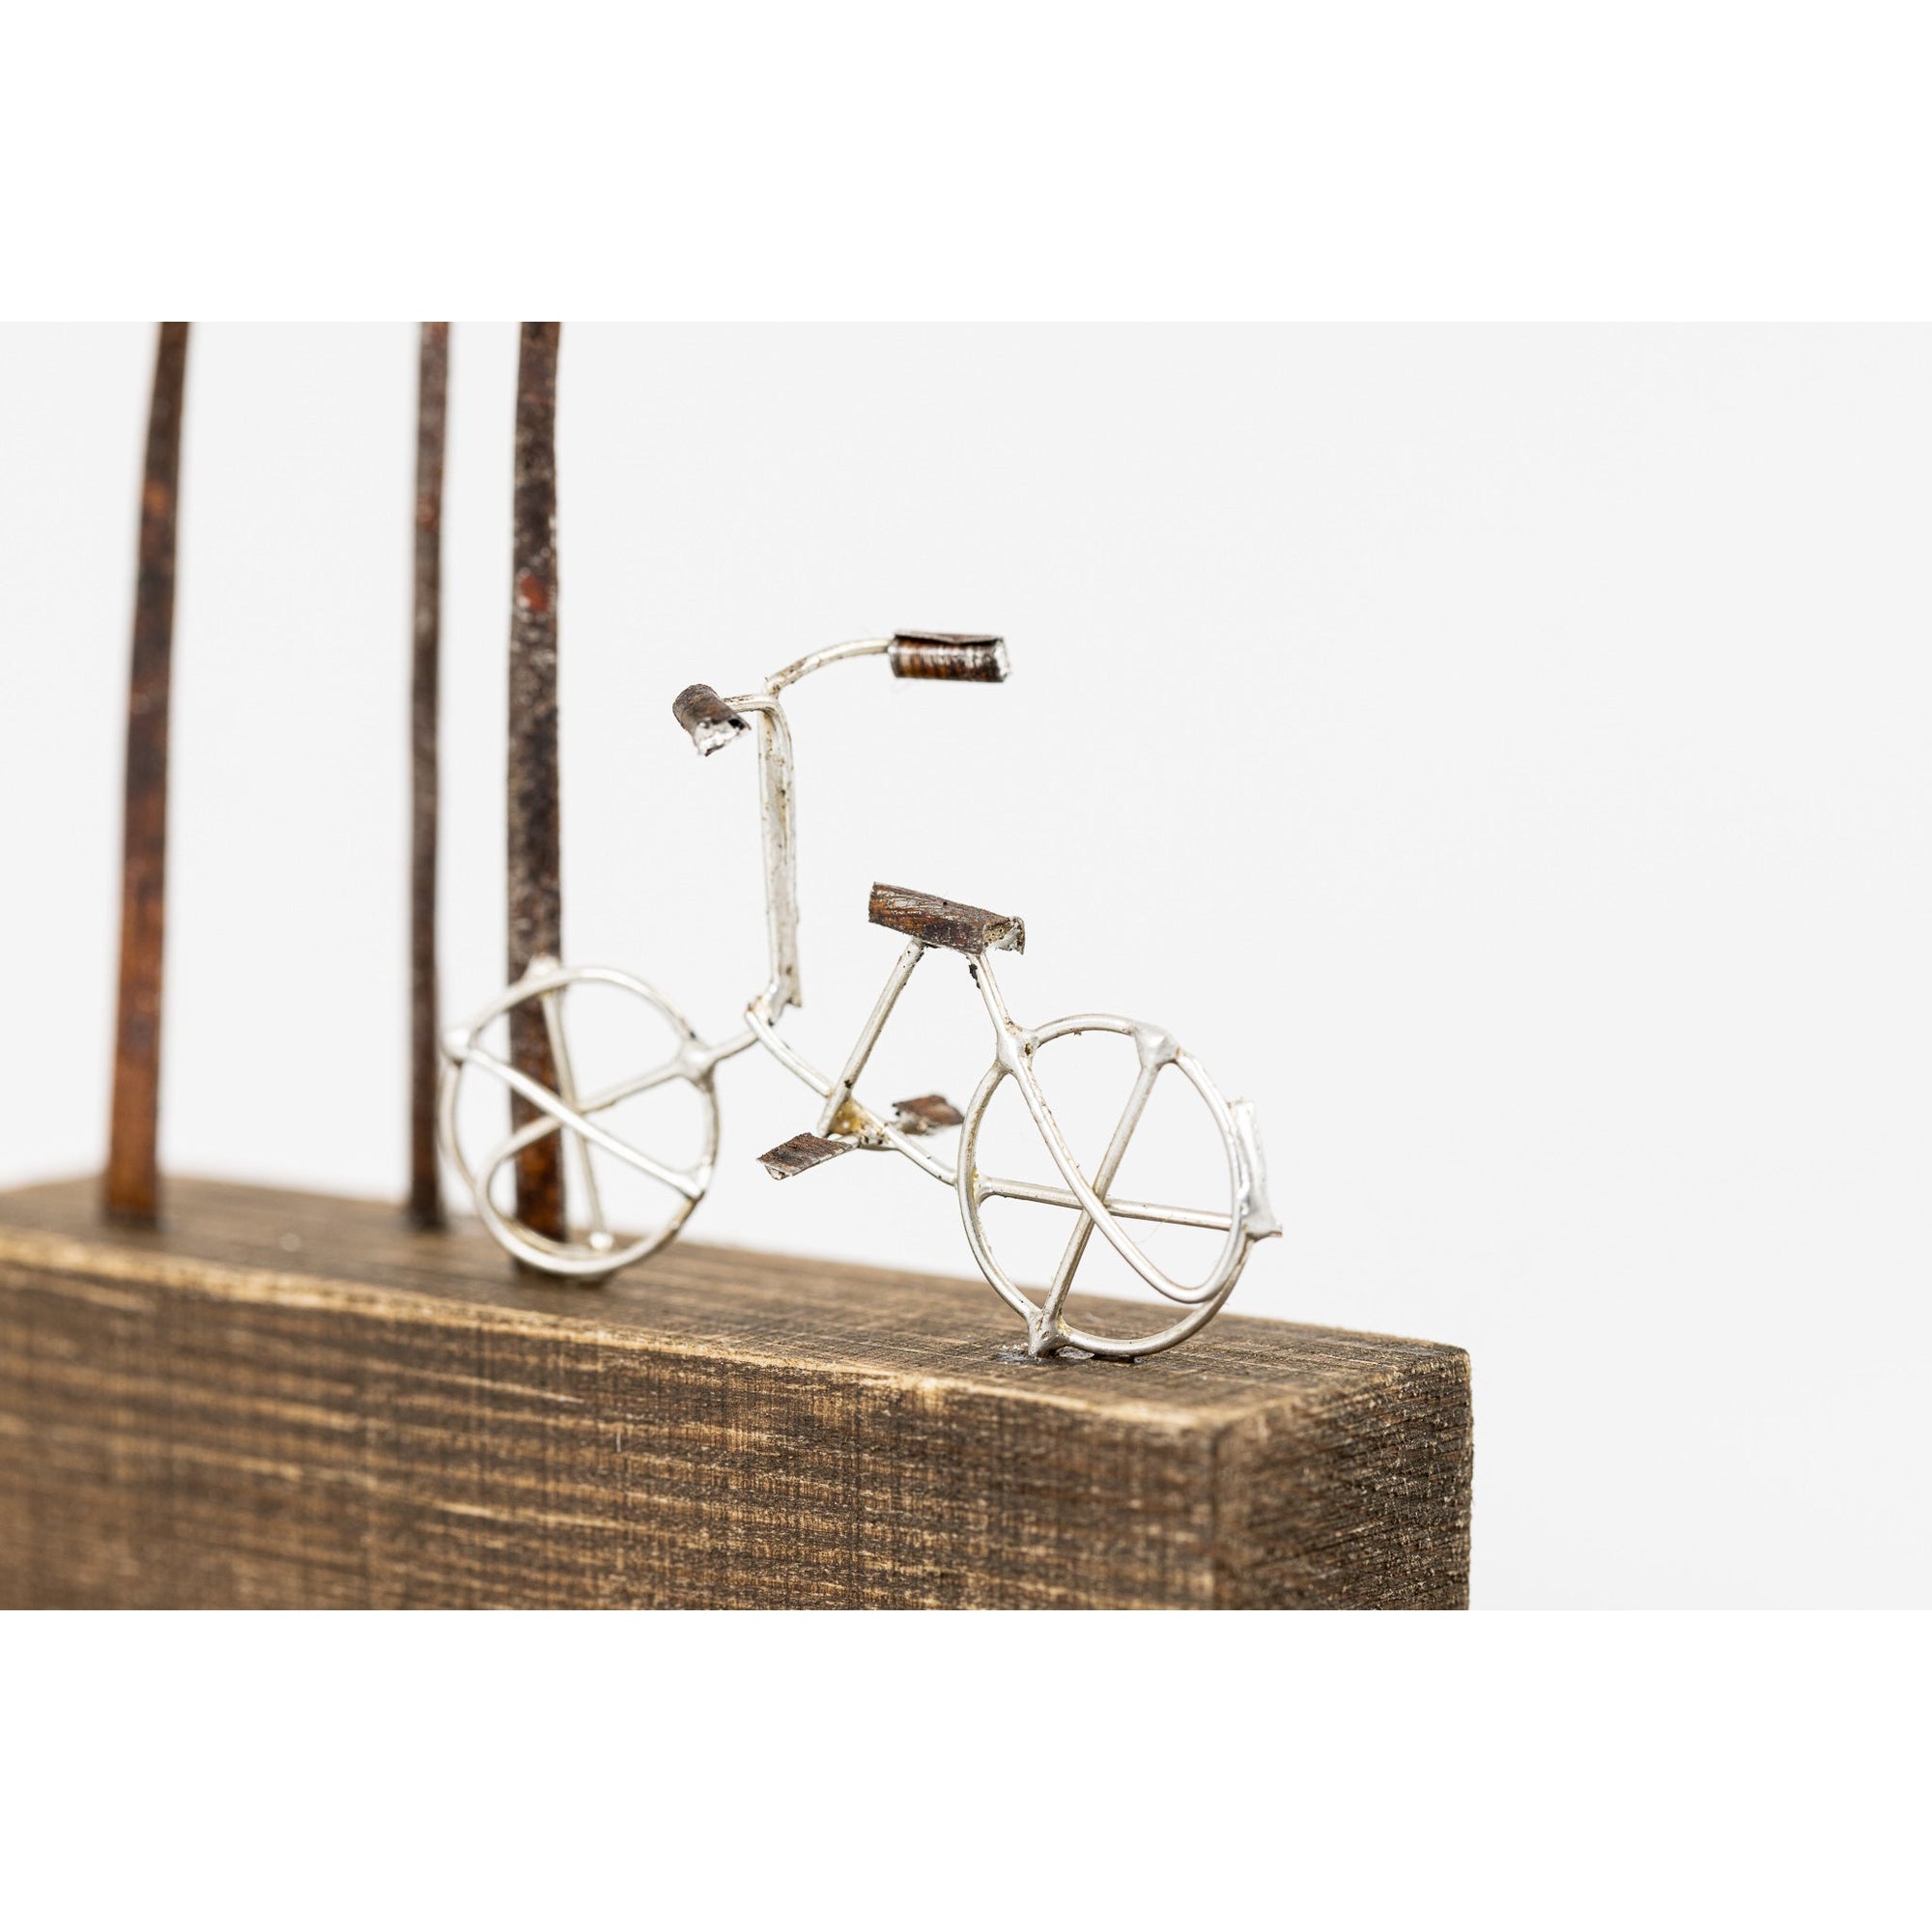 Bicycle and trees by Sarah Jane Brown available at Padstow Gallery, Cornwall